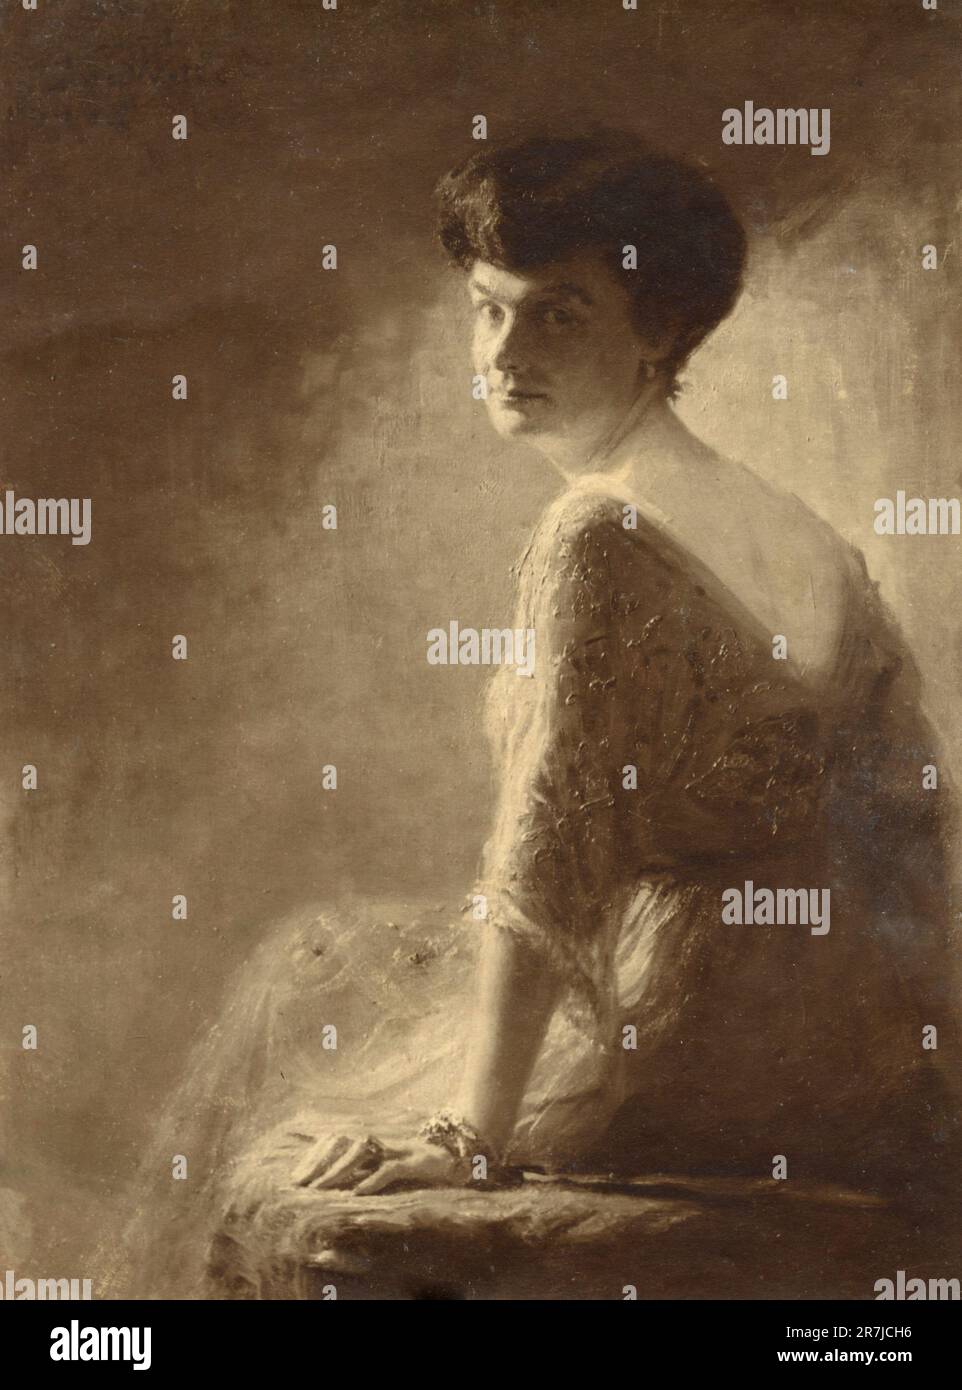 Middle age woman with short hair sitting, painting by unidentified artist, 1910s Stock Photo